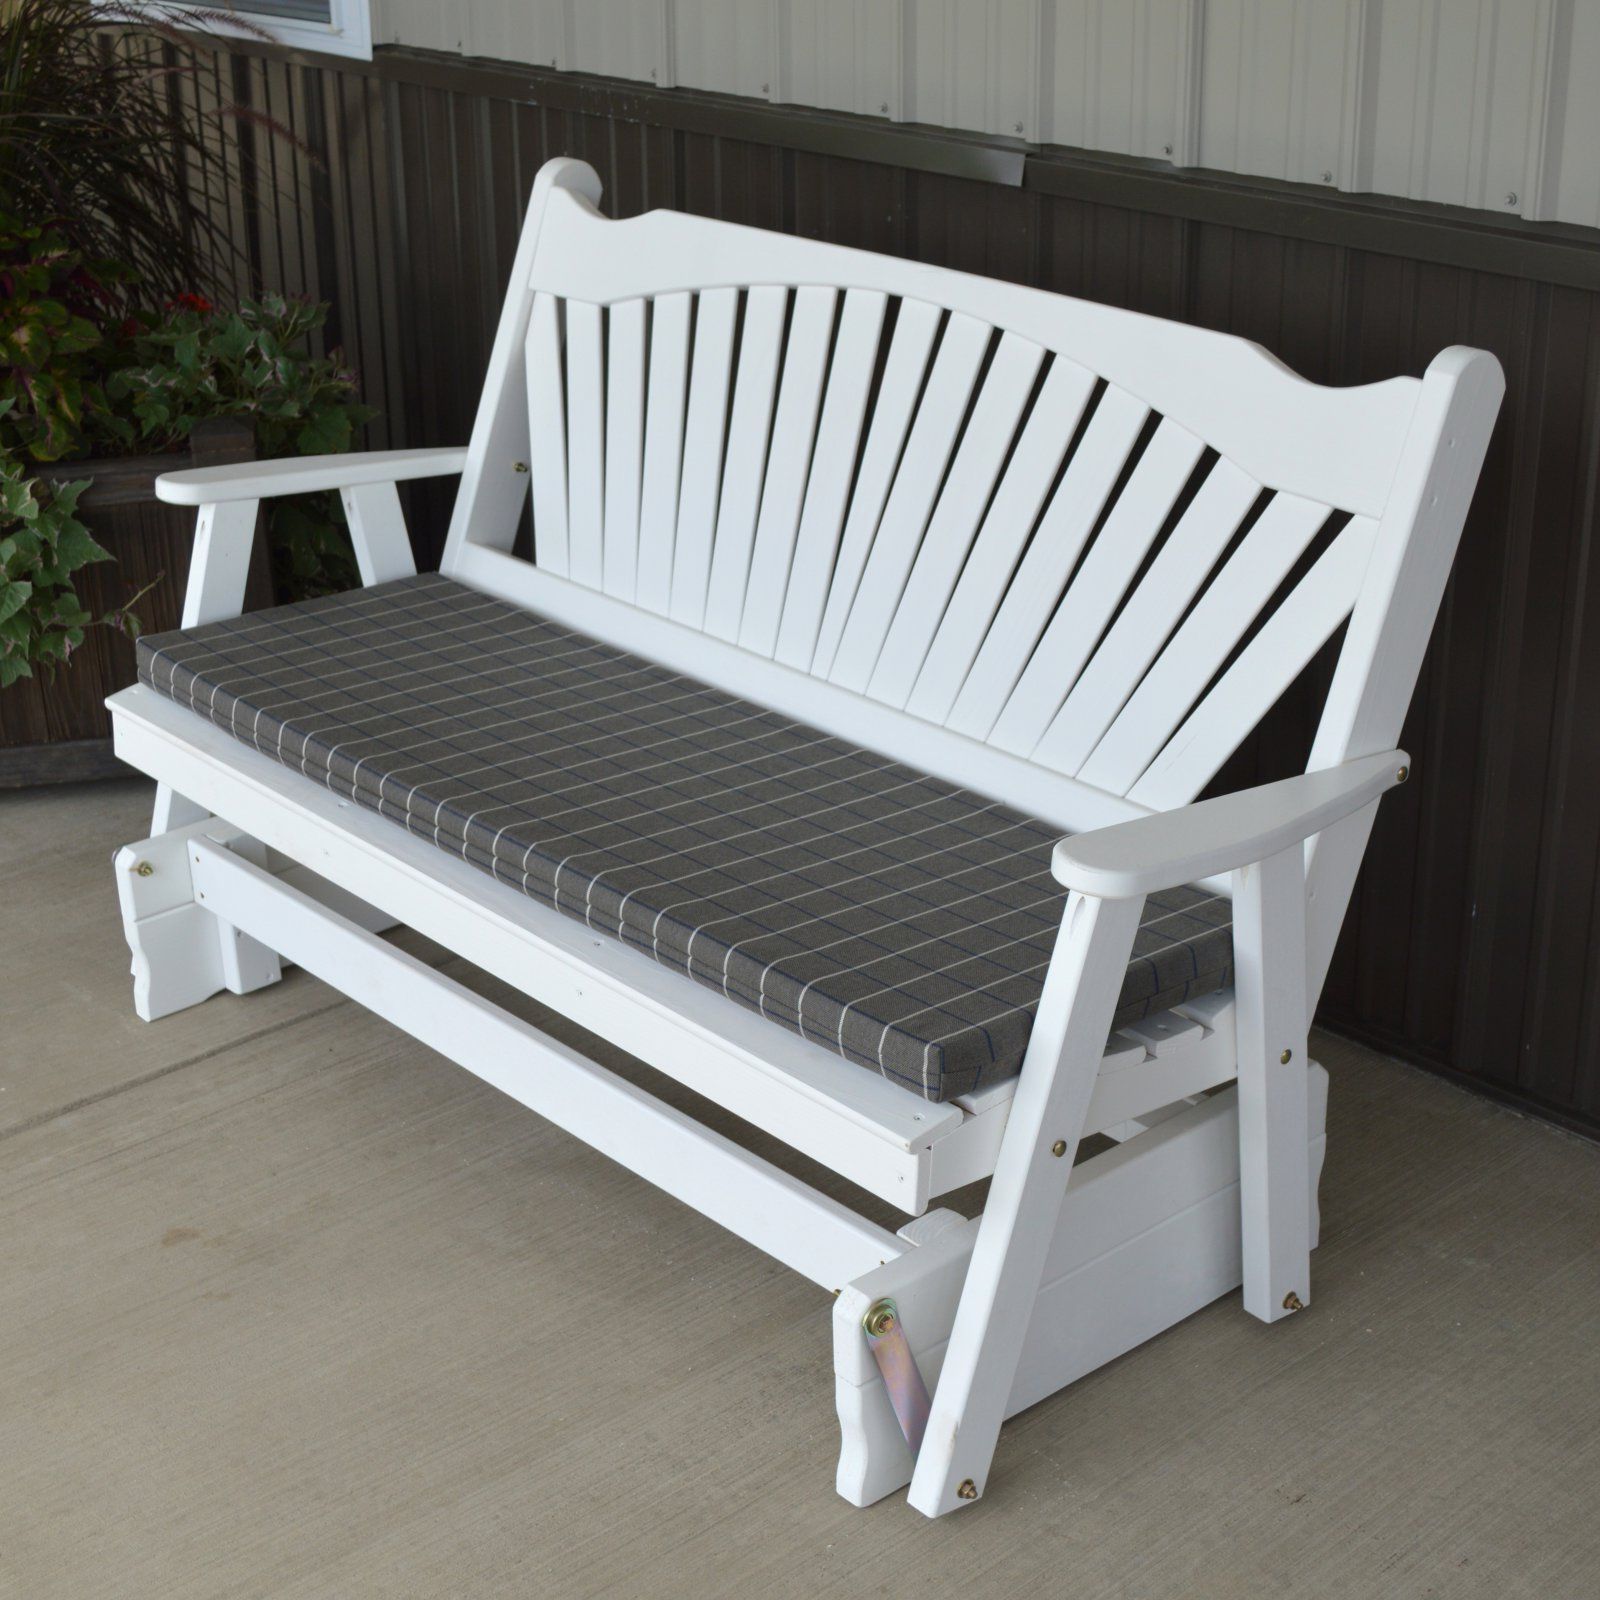 A & L Furniture Yellow Pine Fanback Outdoor Bench Glider Oak In Favorite Fanback Glider Benches (View 5 of 30)